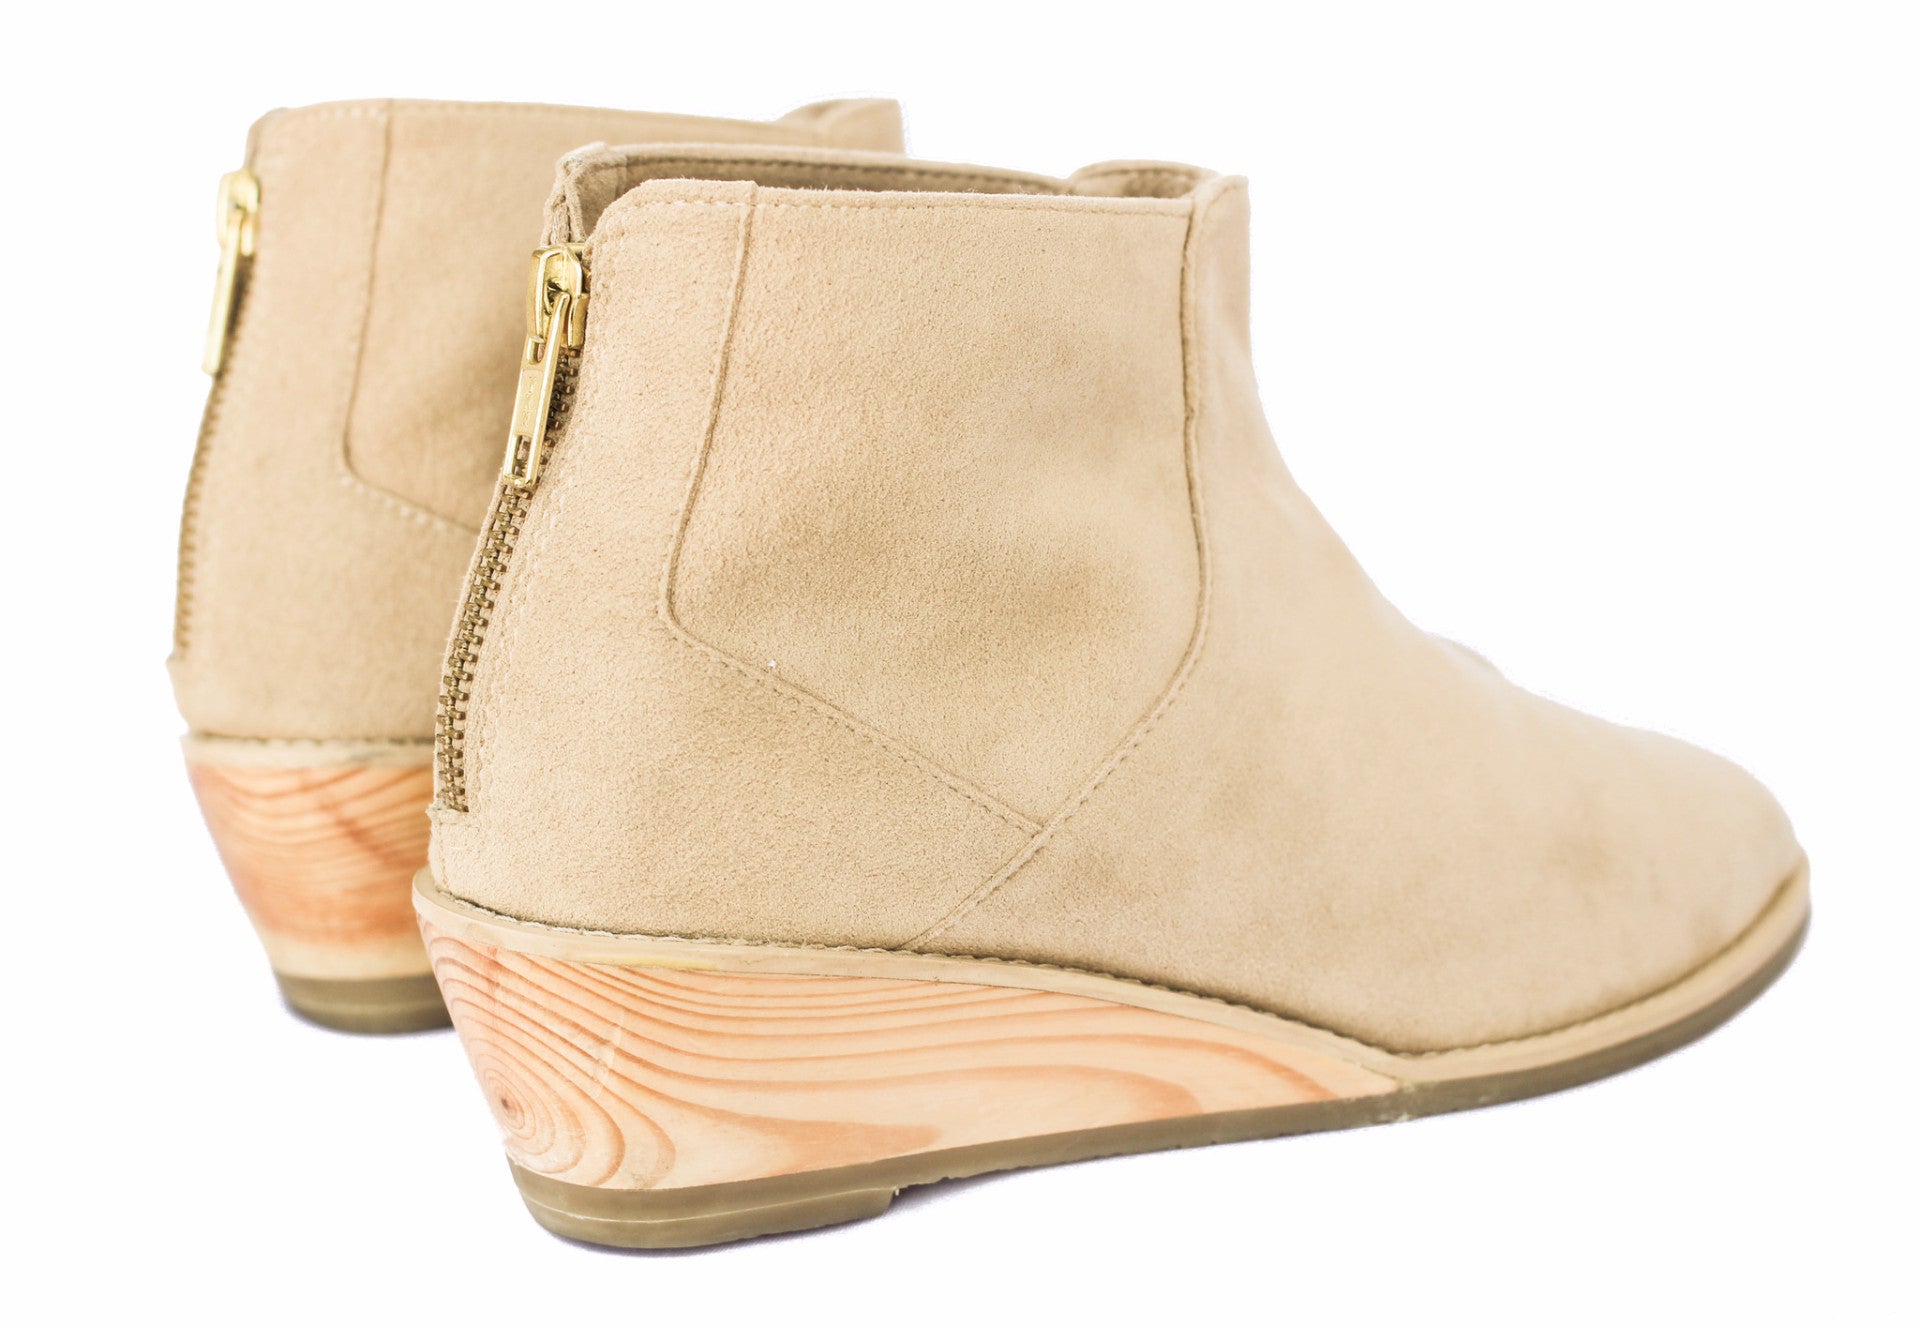 Coco Wedge Bootie